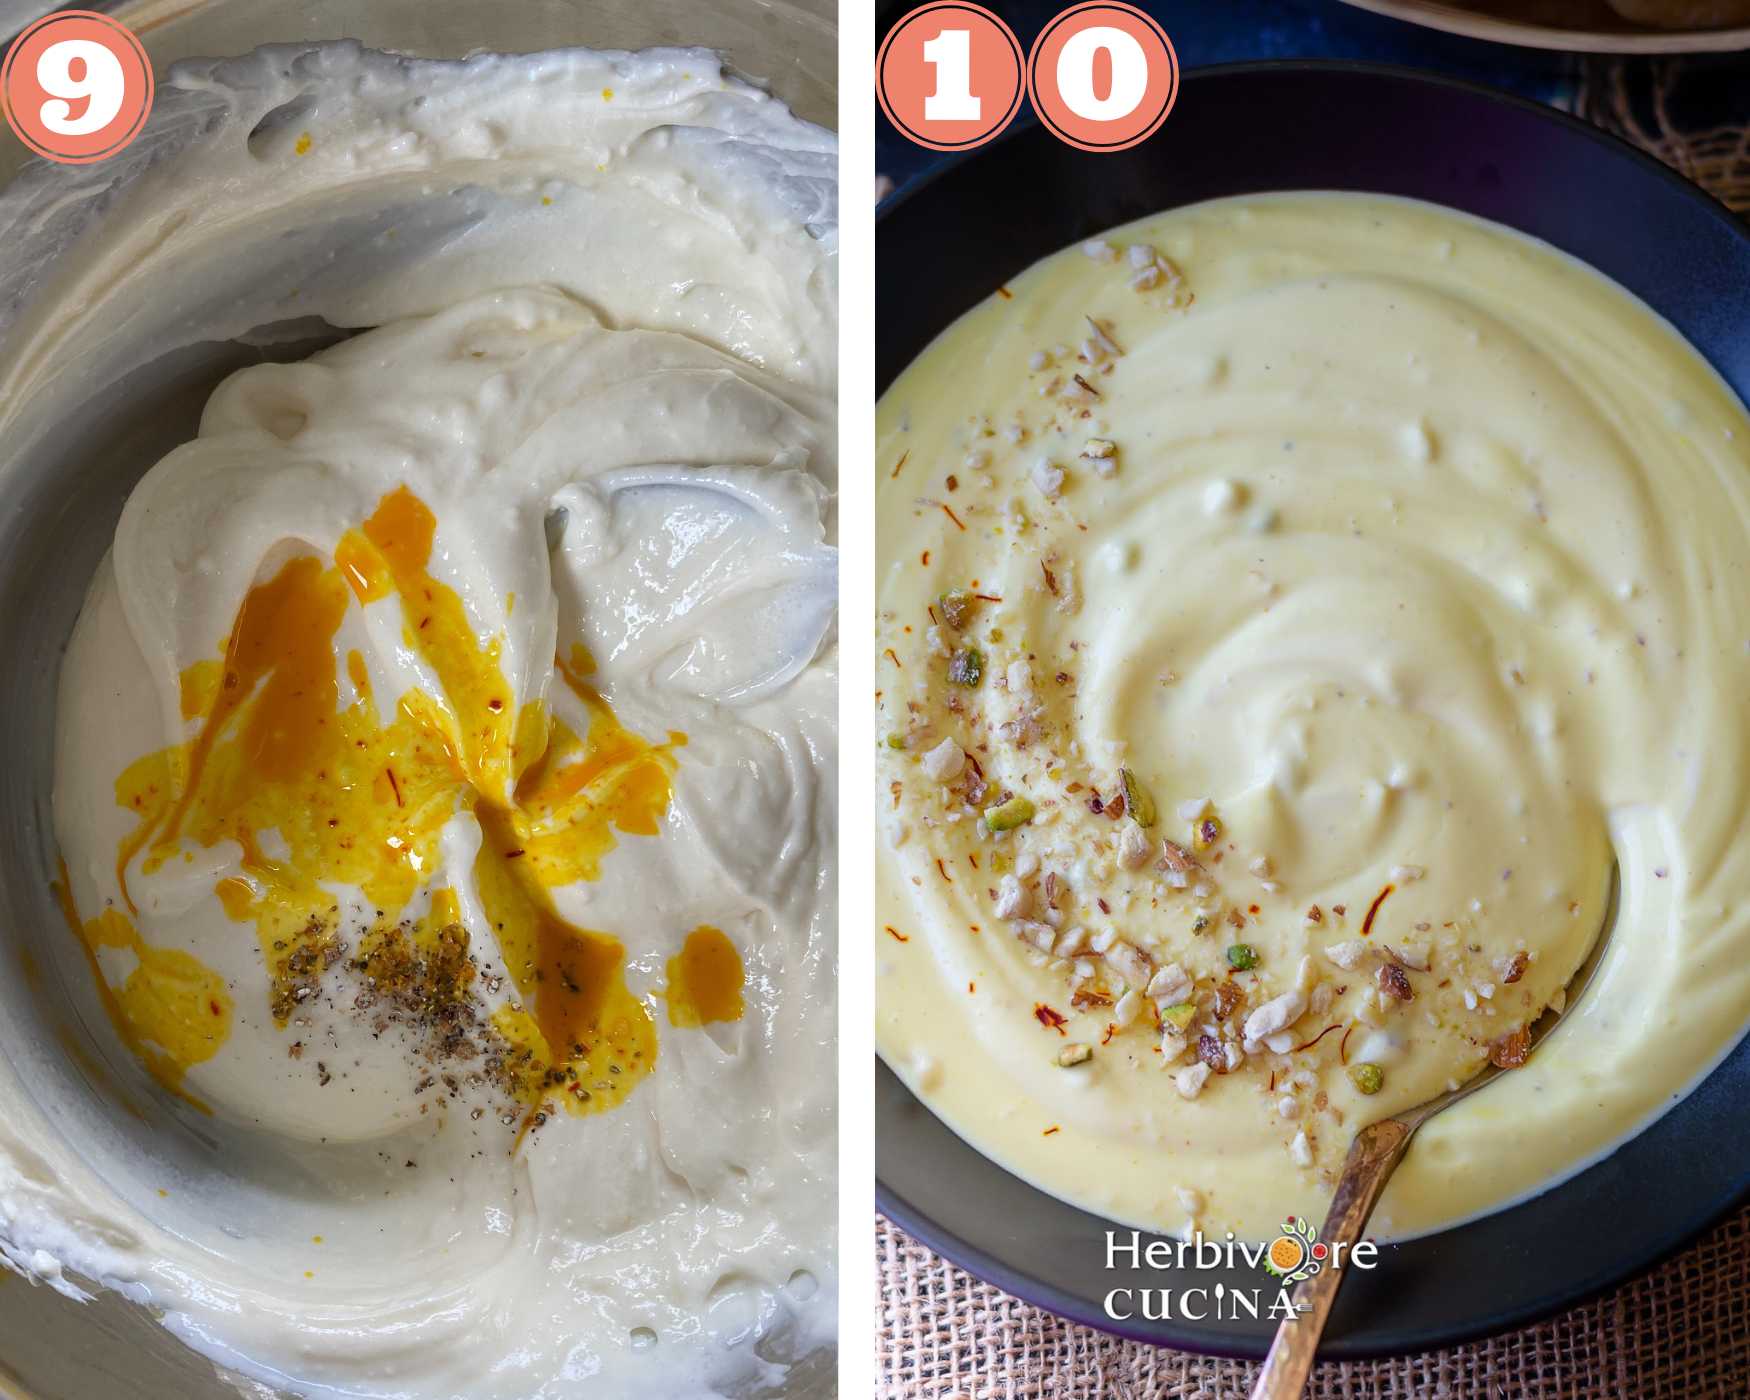 Add saffron milk and cardamom to the yogurt and mix well before serving chilled.